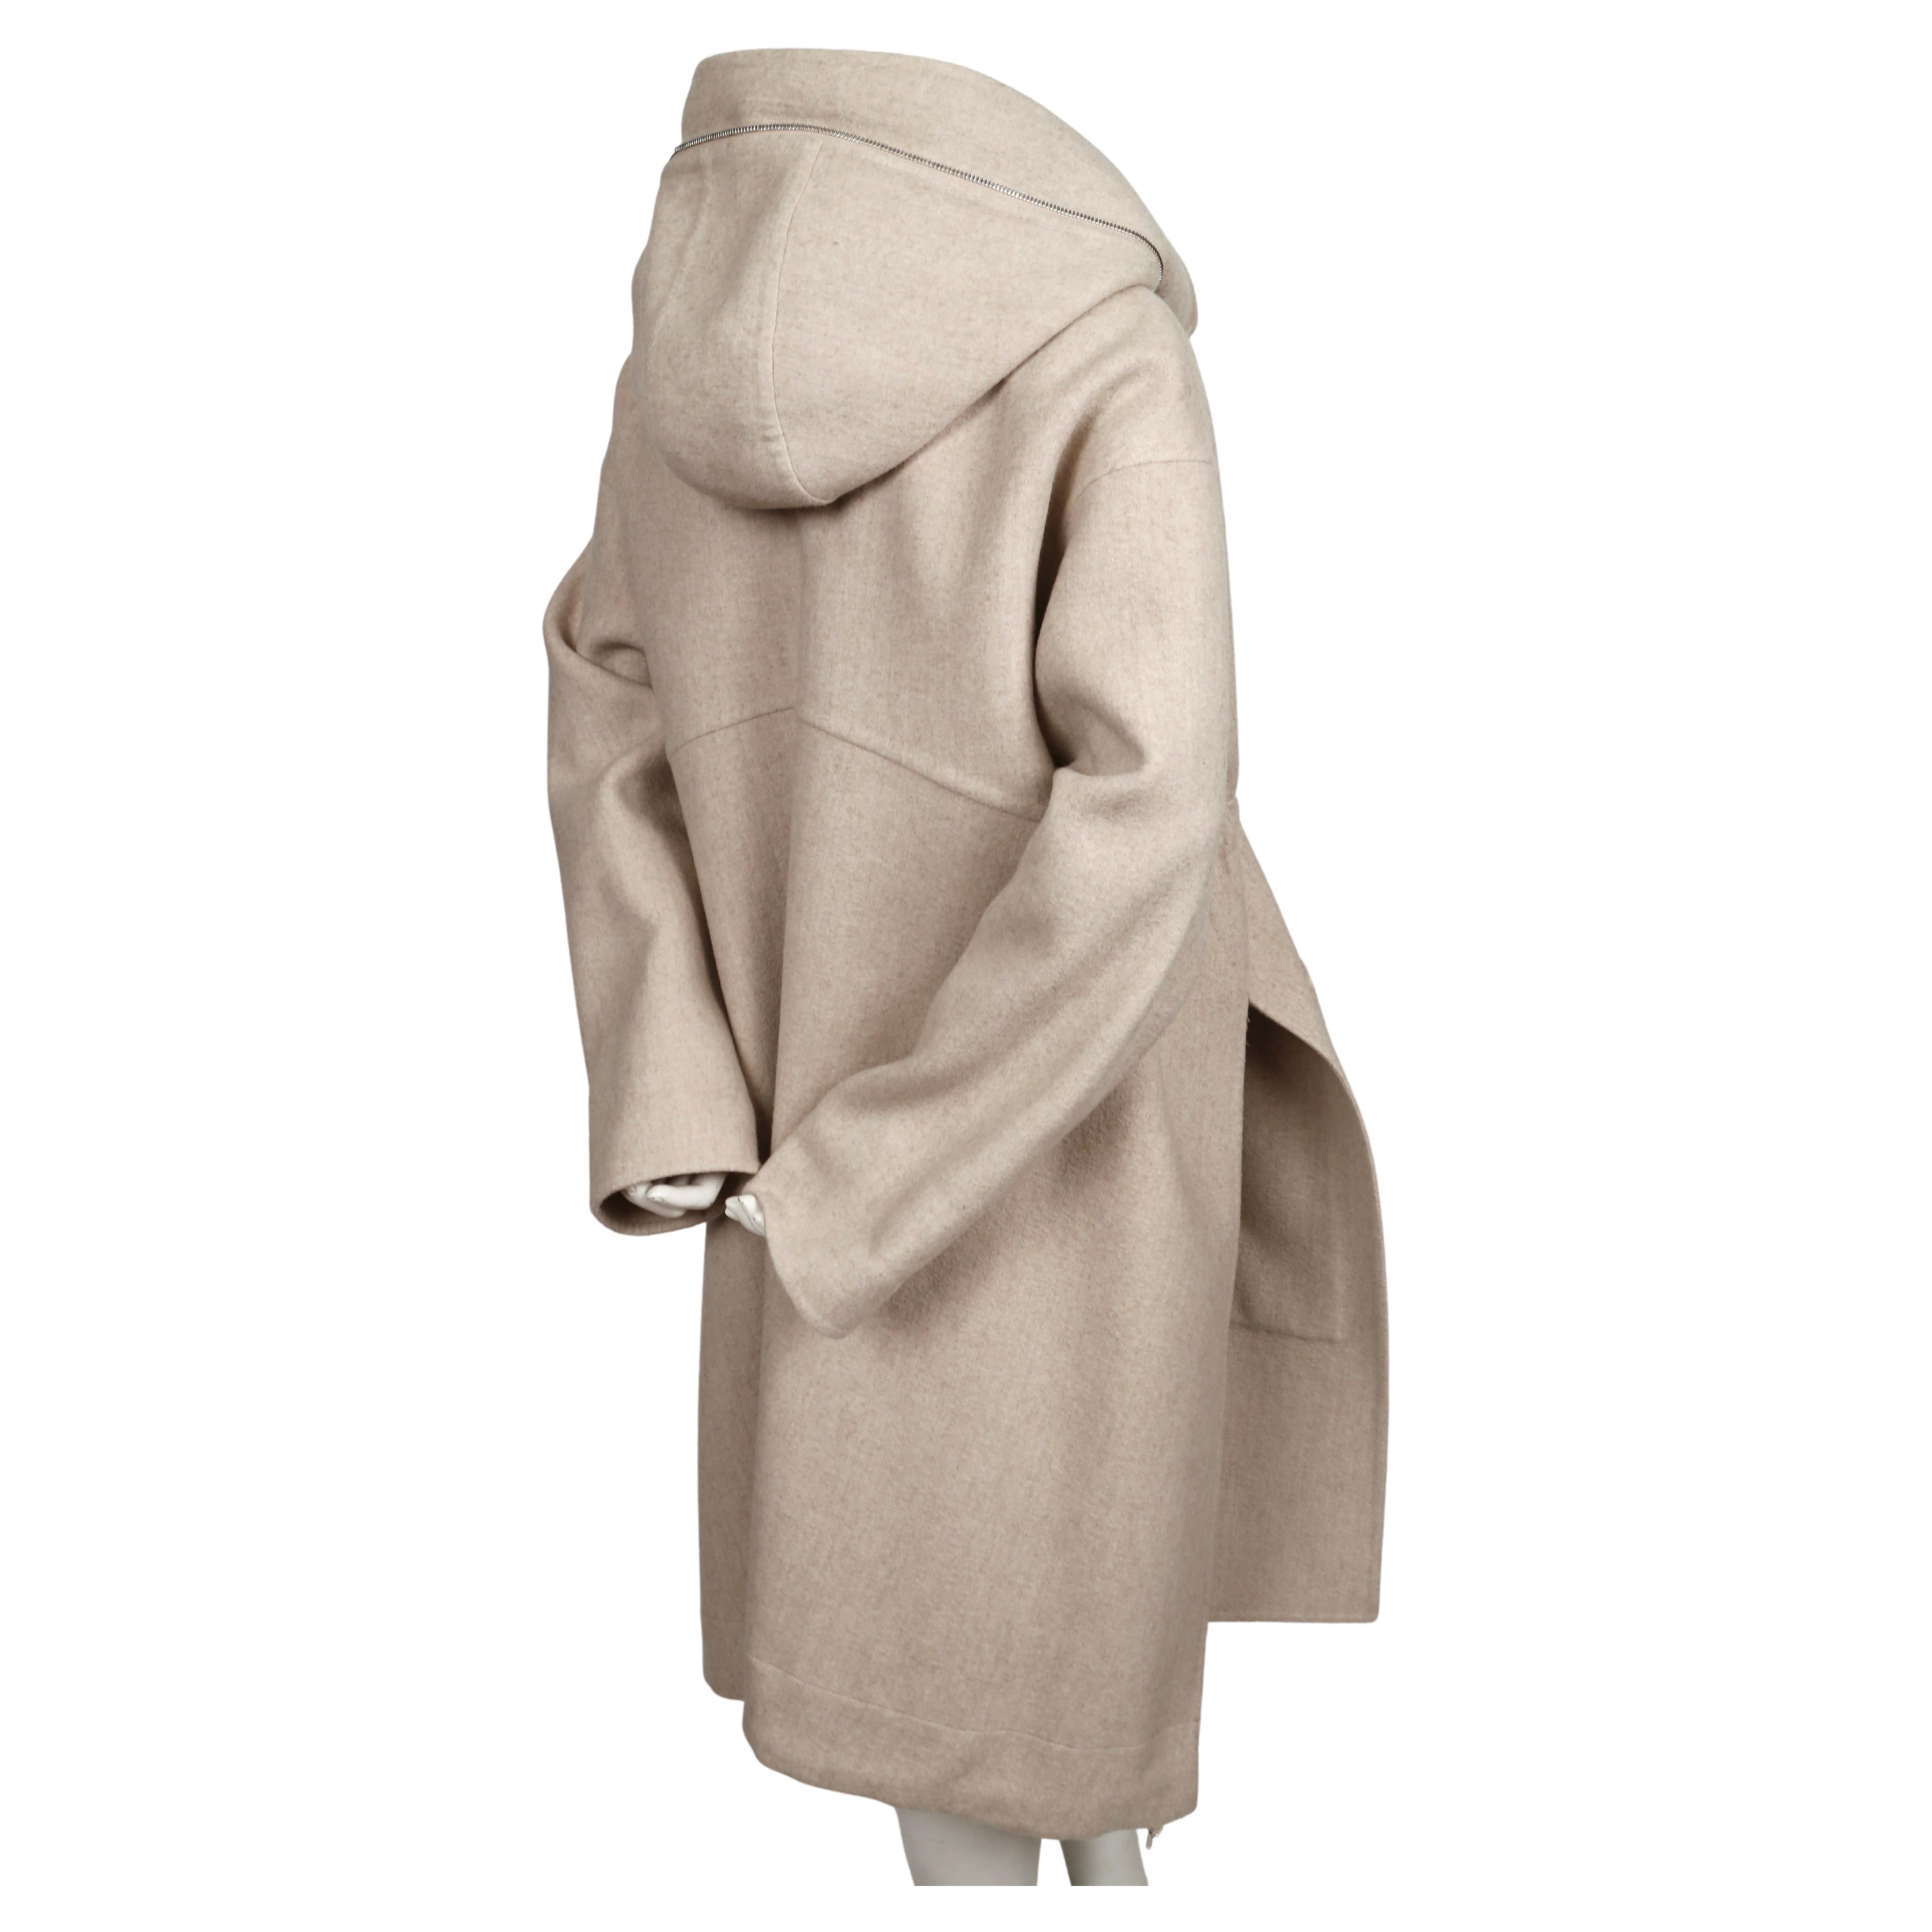 CELINE by PHOEBE PHILO oatmeal wool and cashmere coat with hood - resort 2016 For Sale 2